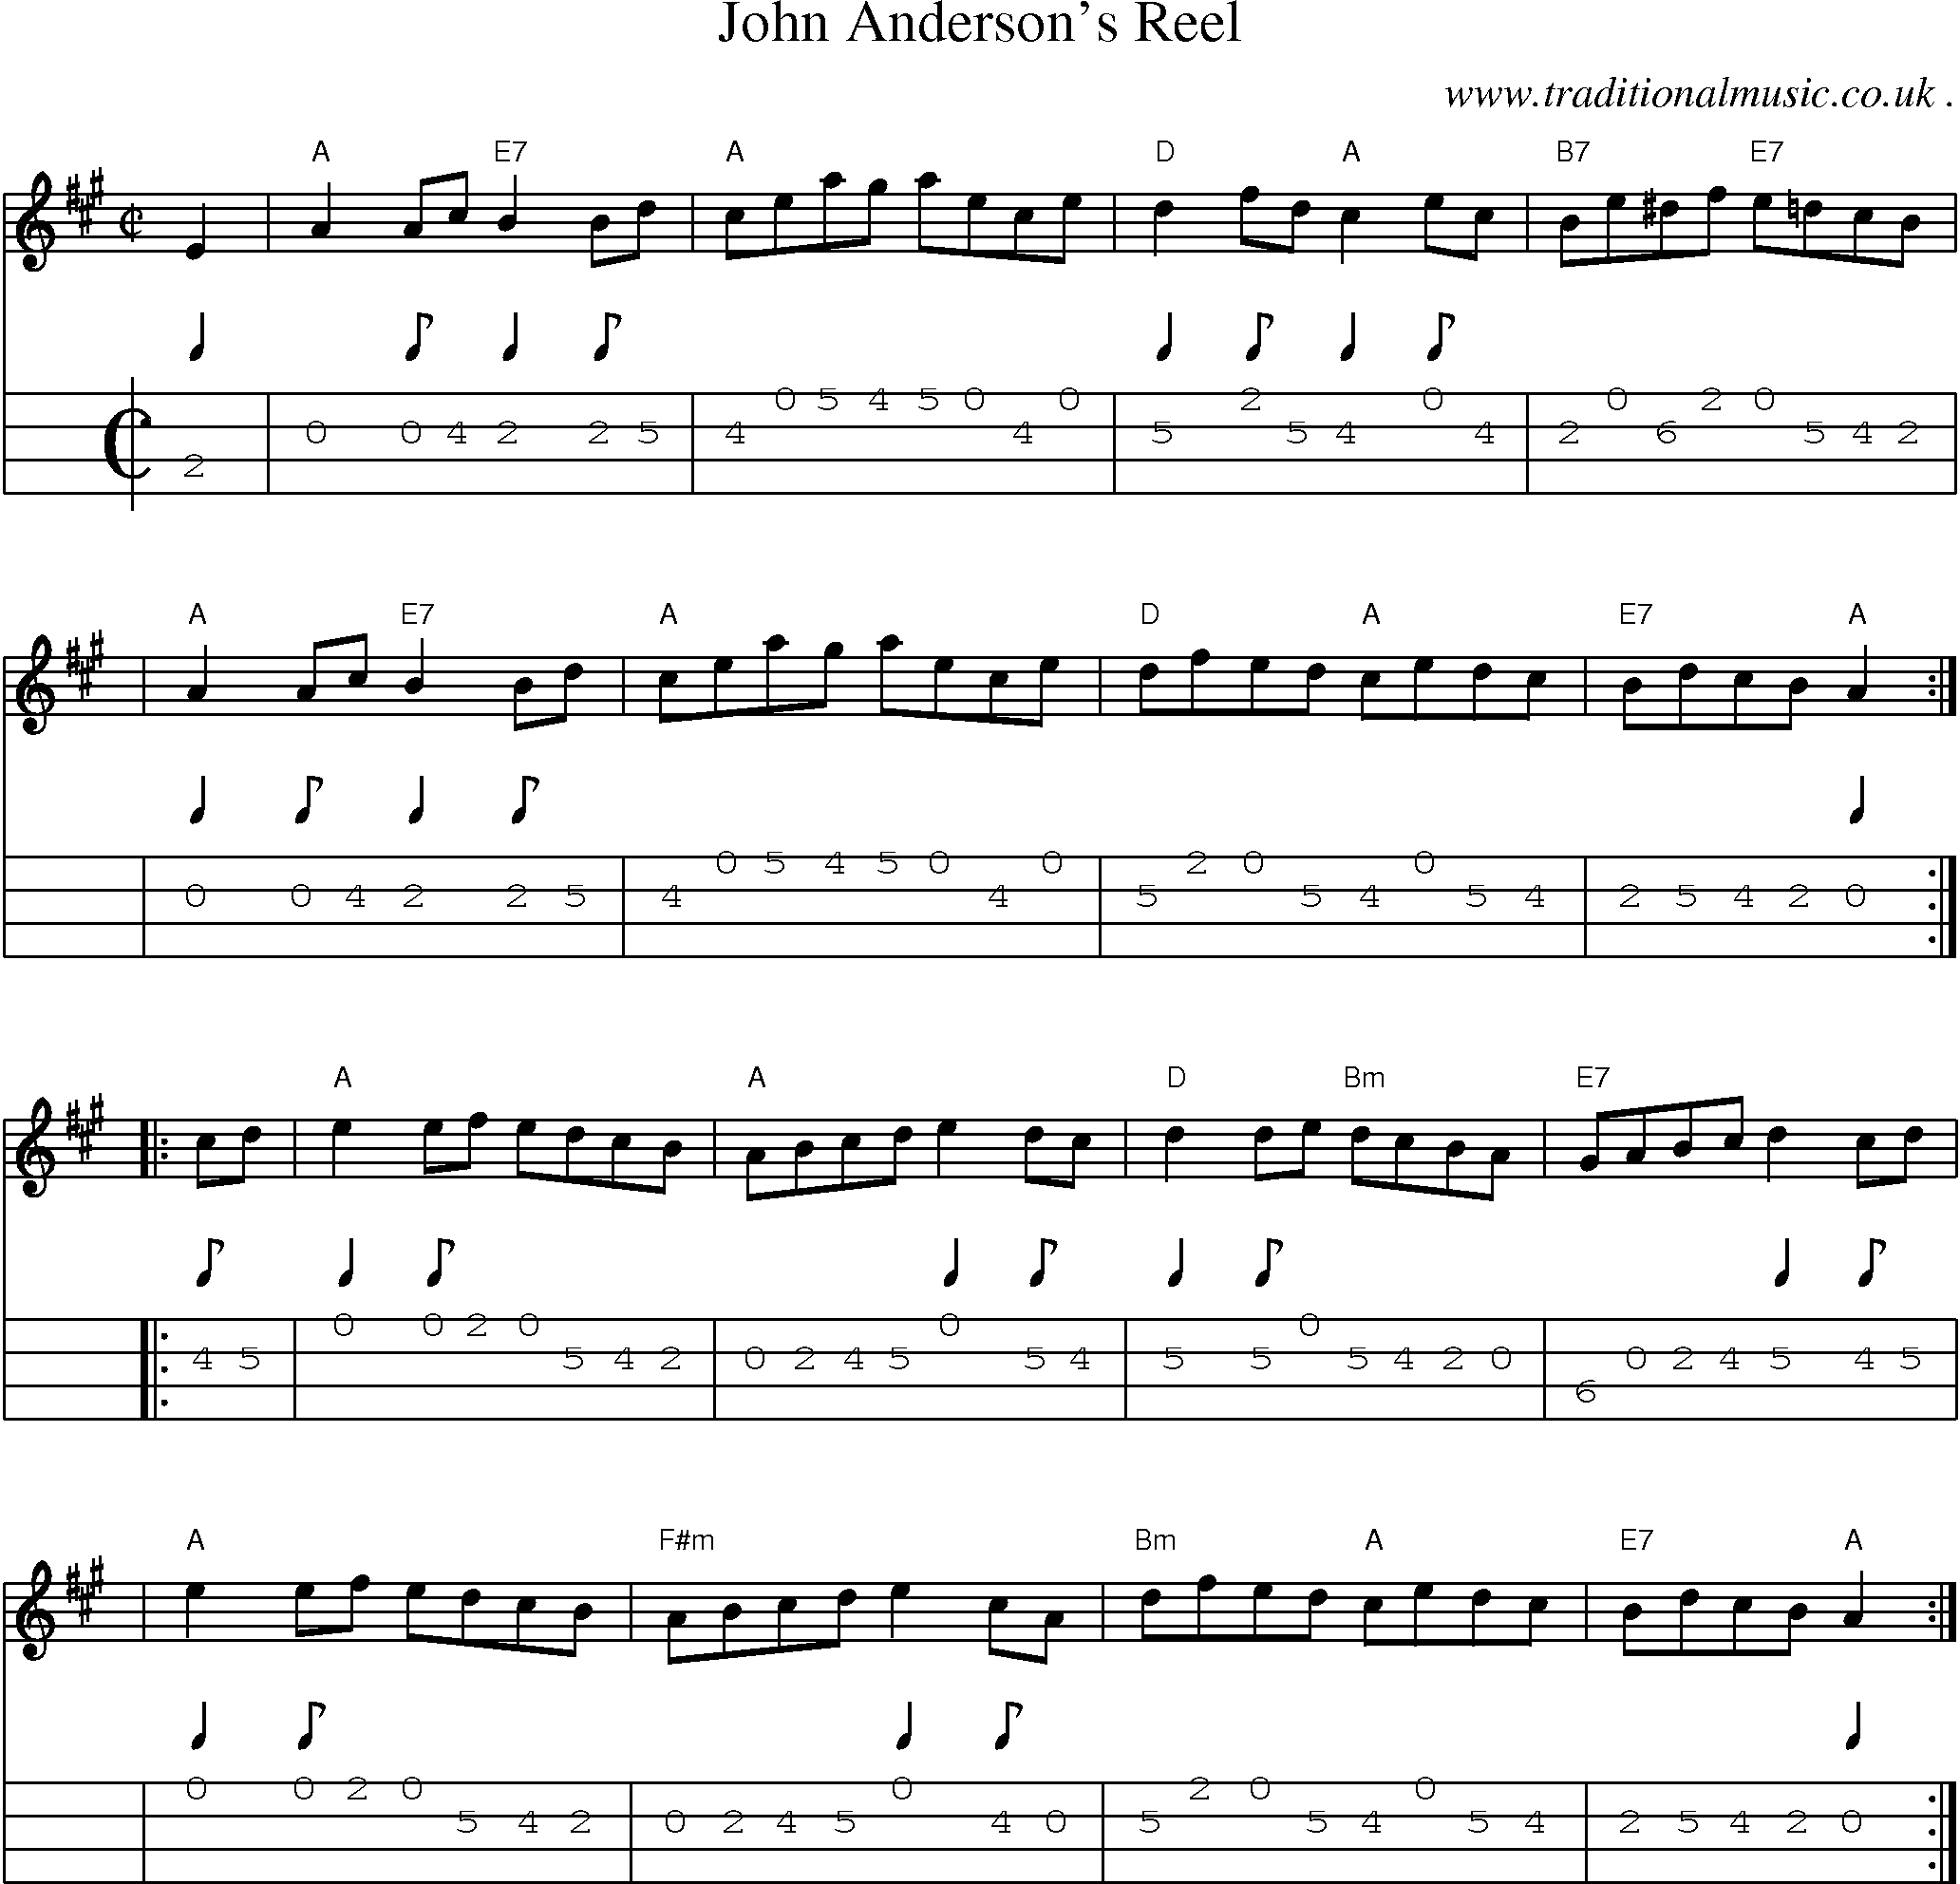 Sheet-music  score, Chords and Mandolin Tabs for John Andersons Reel